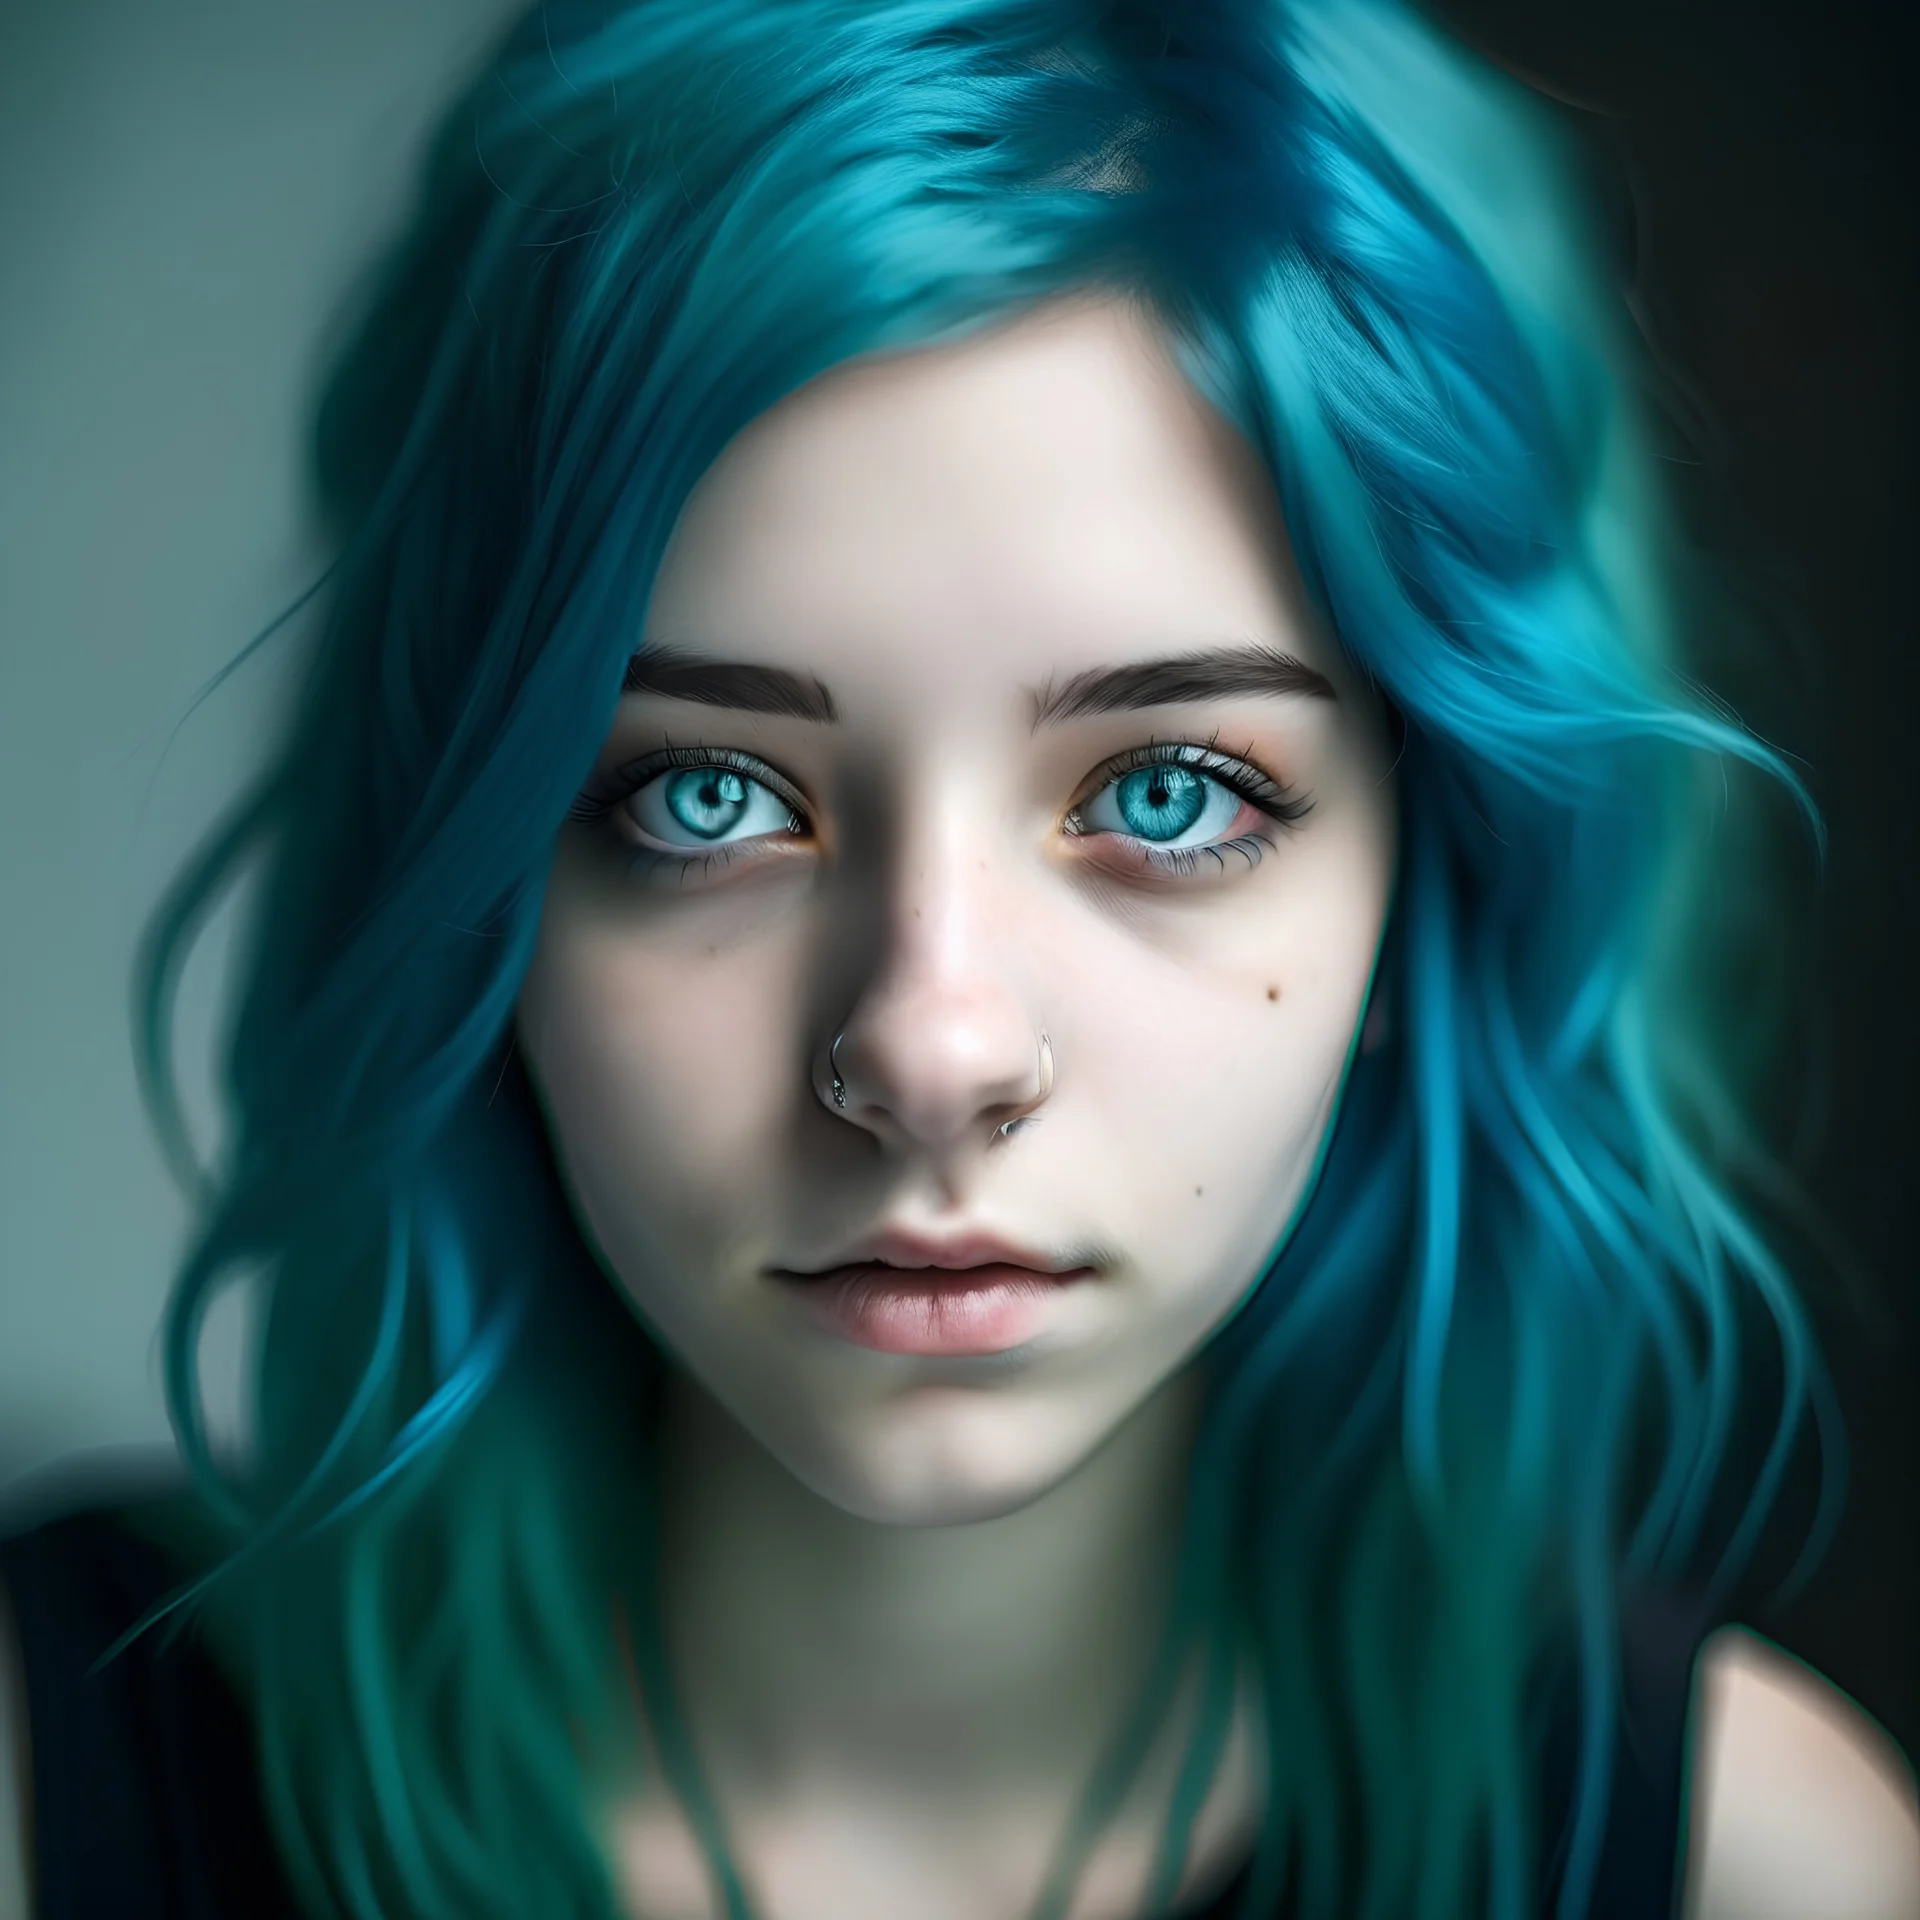 A portrait of a 16 years old girl. She has got turquoise hair and dark blue eyes.